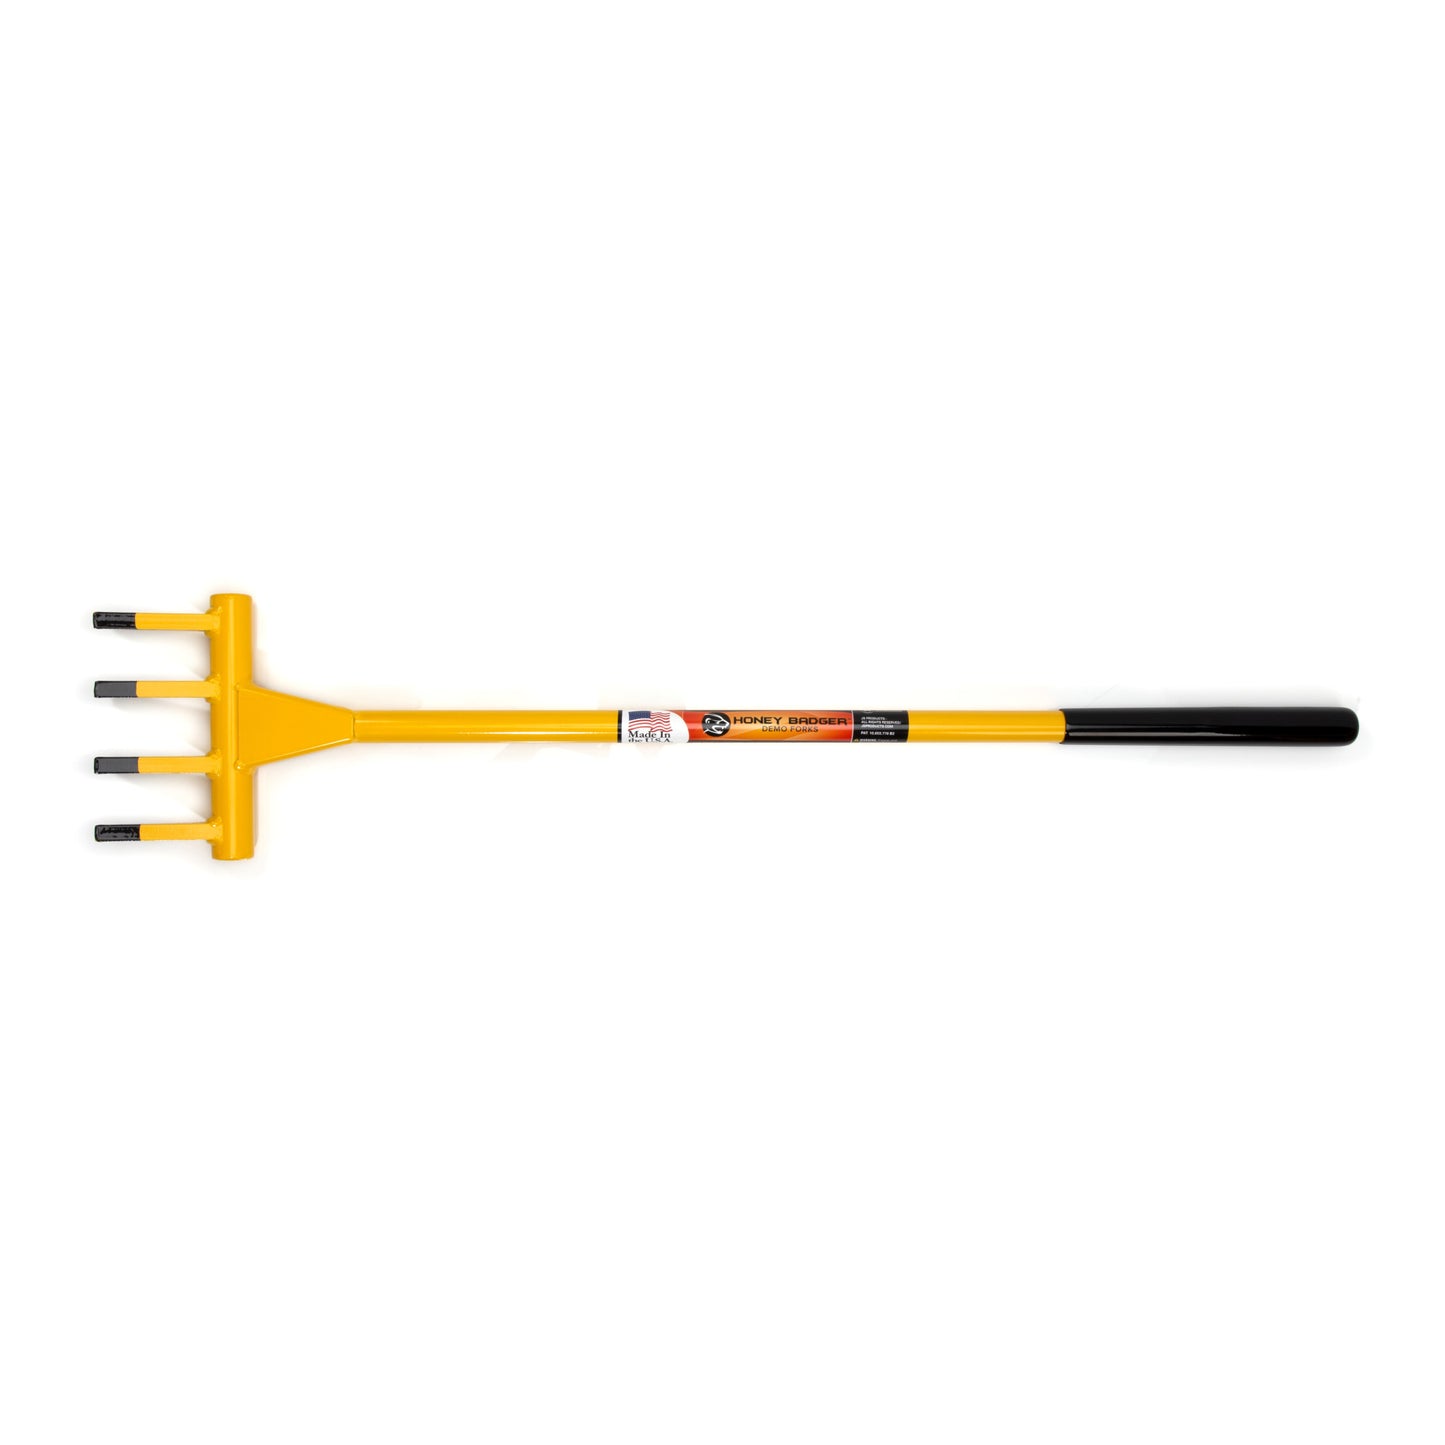 4-Tine Honey Badger Demo Fork with 40-Inch Handle